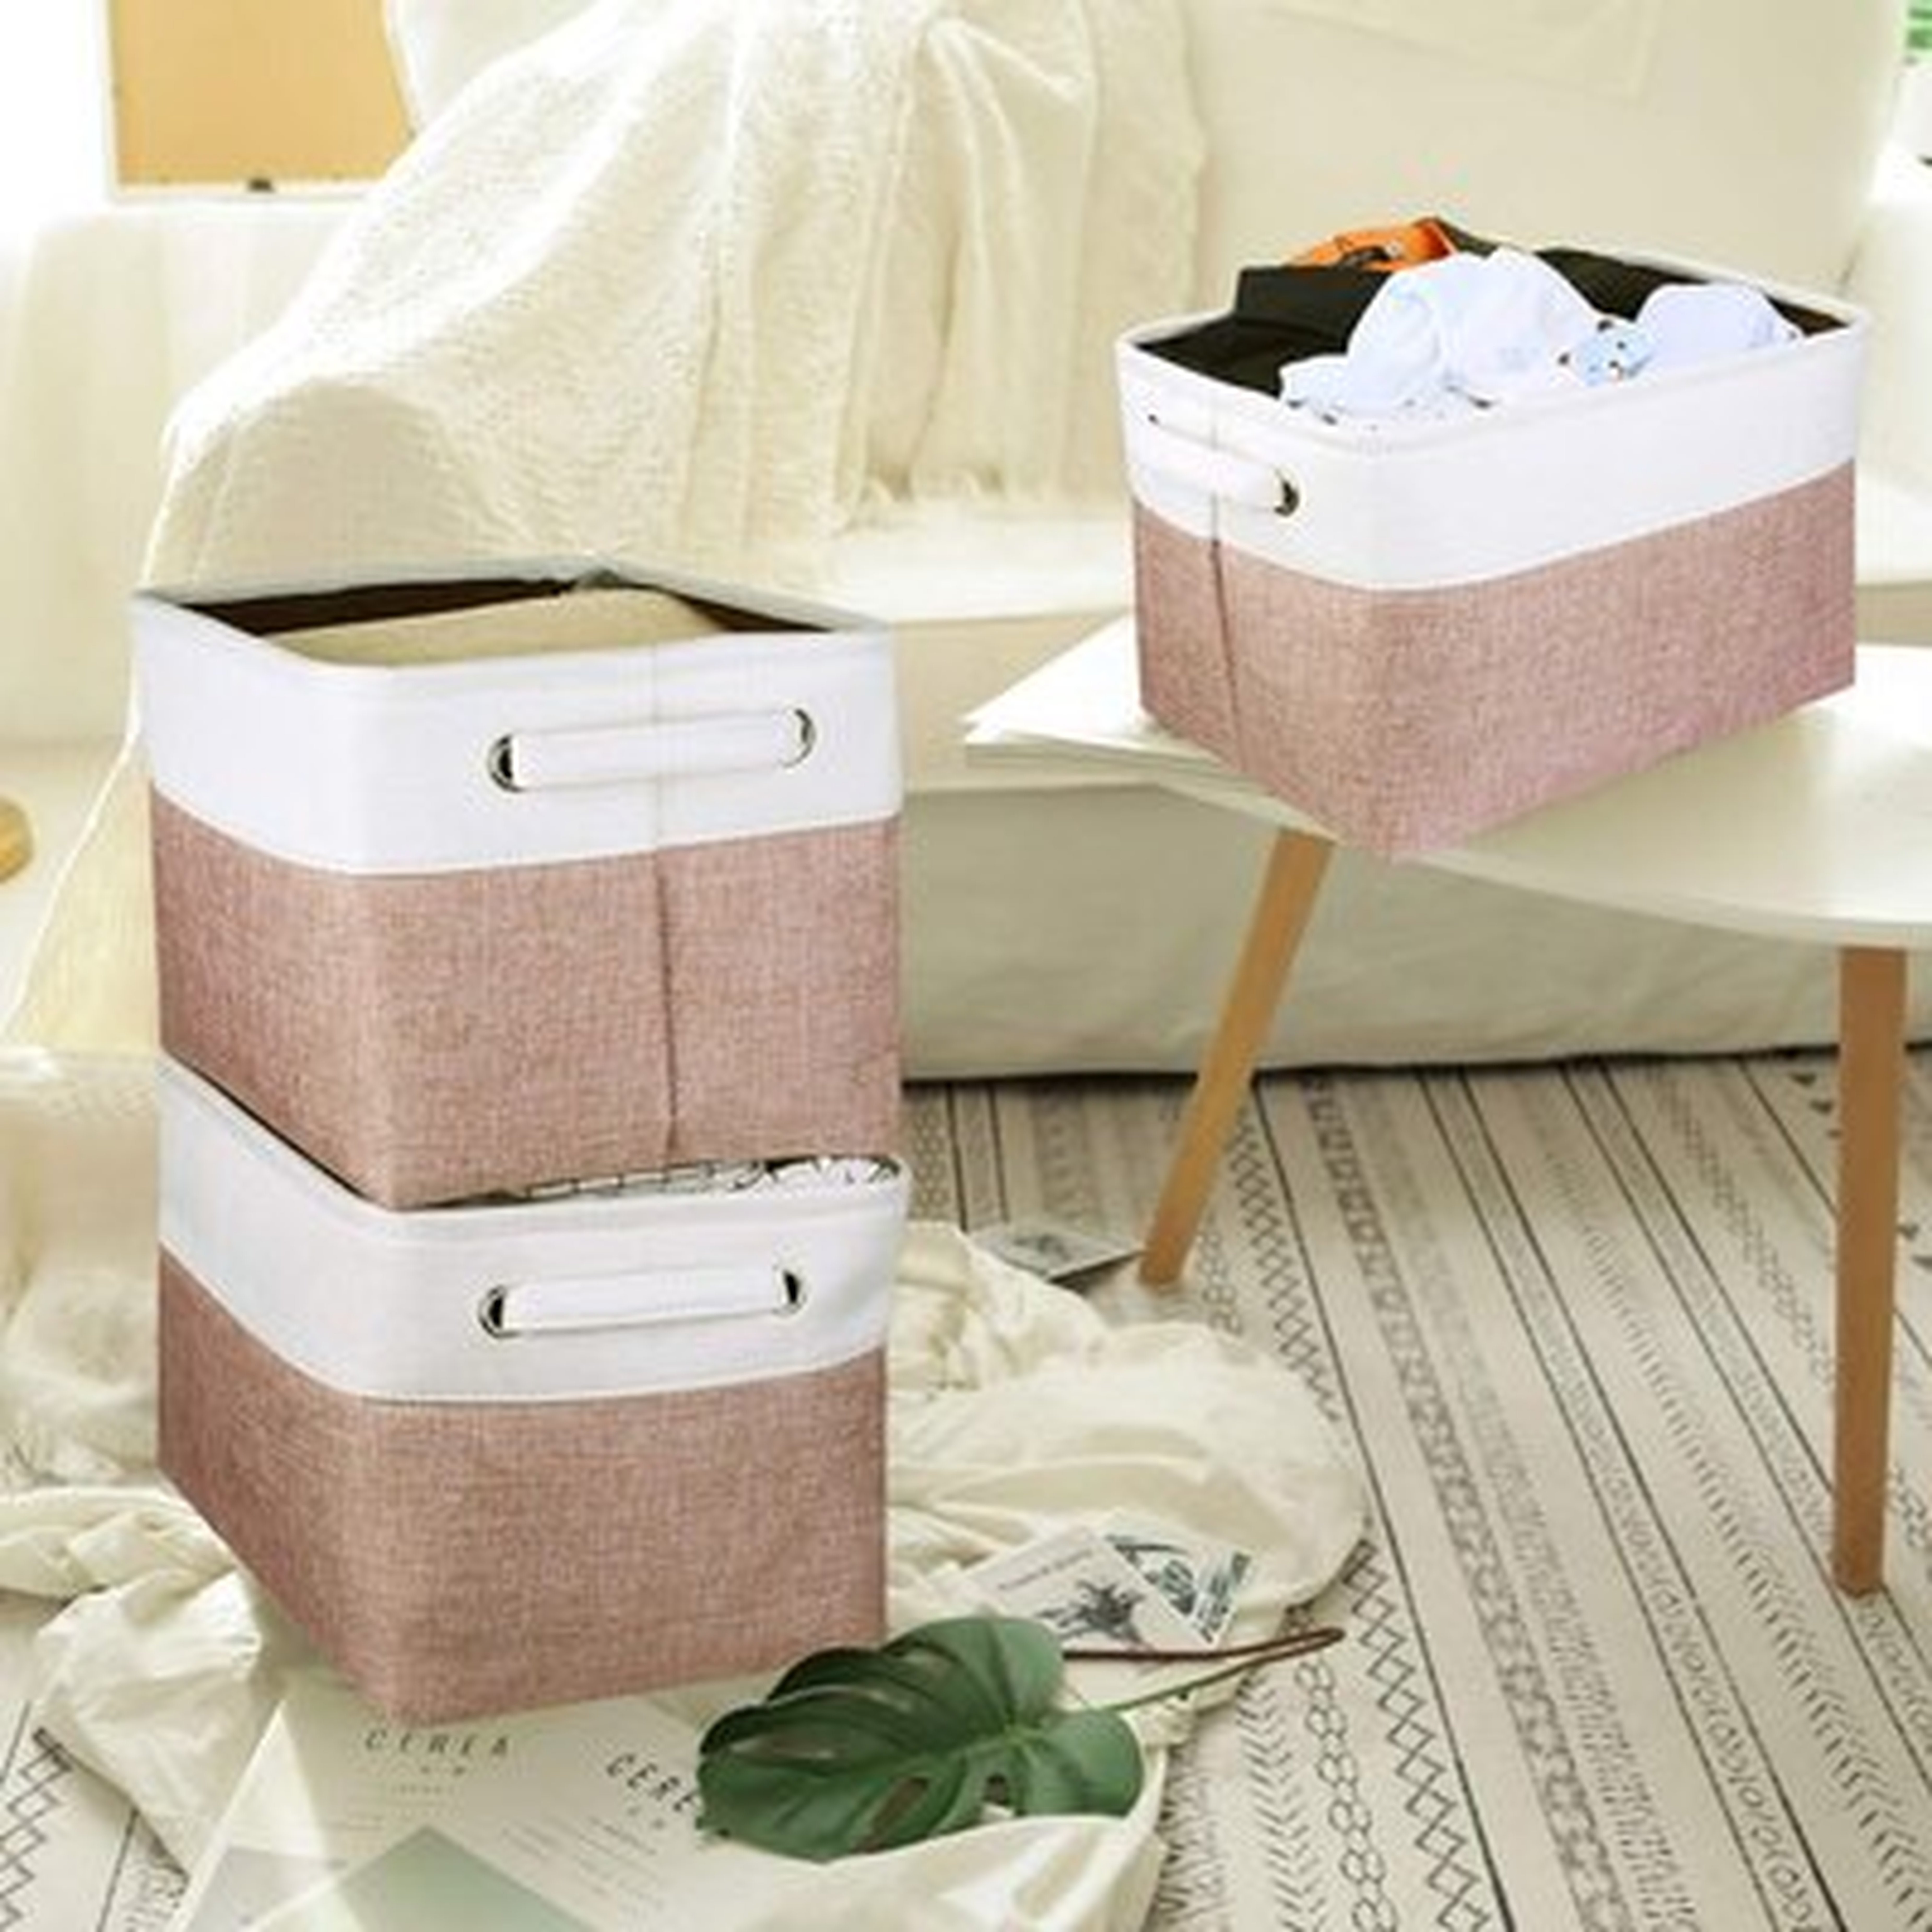 Storage Bins, Collapsible Cube Baskets Containers With Sturdy Cotton Handles, Foldable Fabric Storage Boxes Organizer For Nursery, Shelf, Closet, Office, SET OF 3 - Wayfair